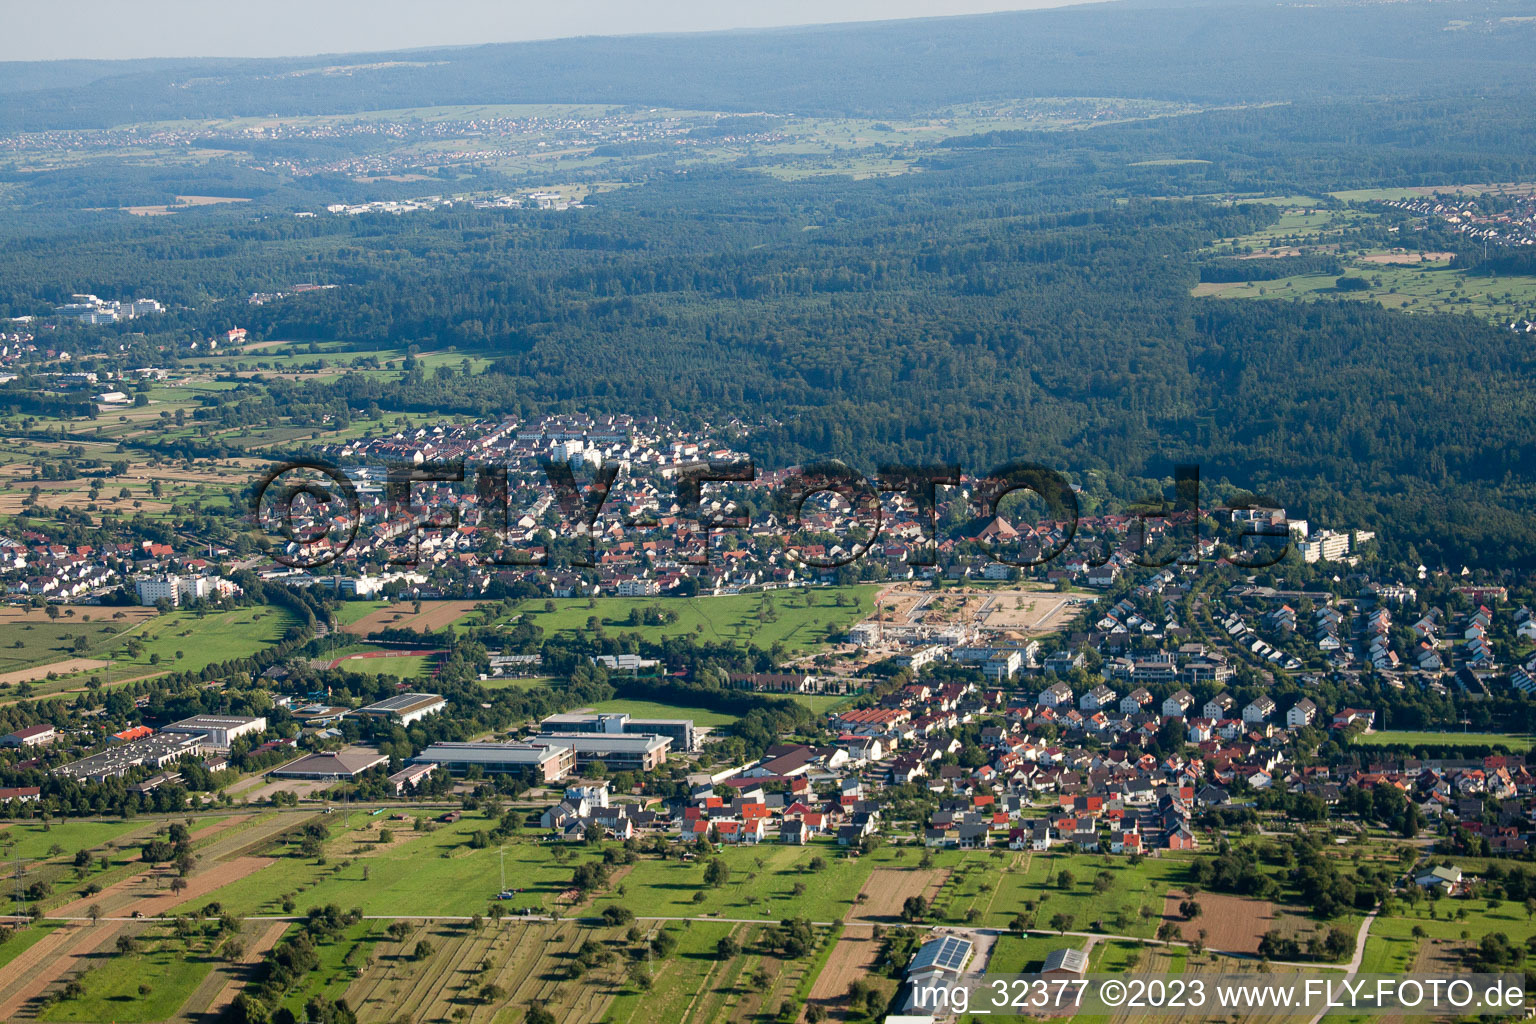 Aerial view of From the north in the district Busenbach in Waldbronn in the state Baden-Wuerttemberg, Germany